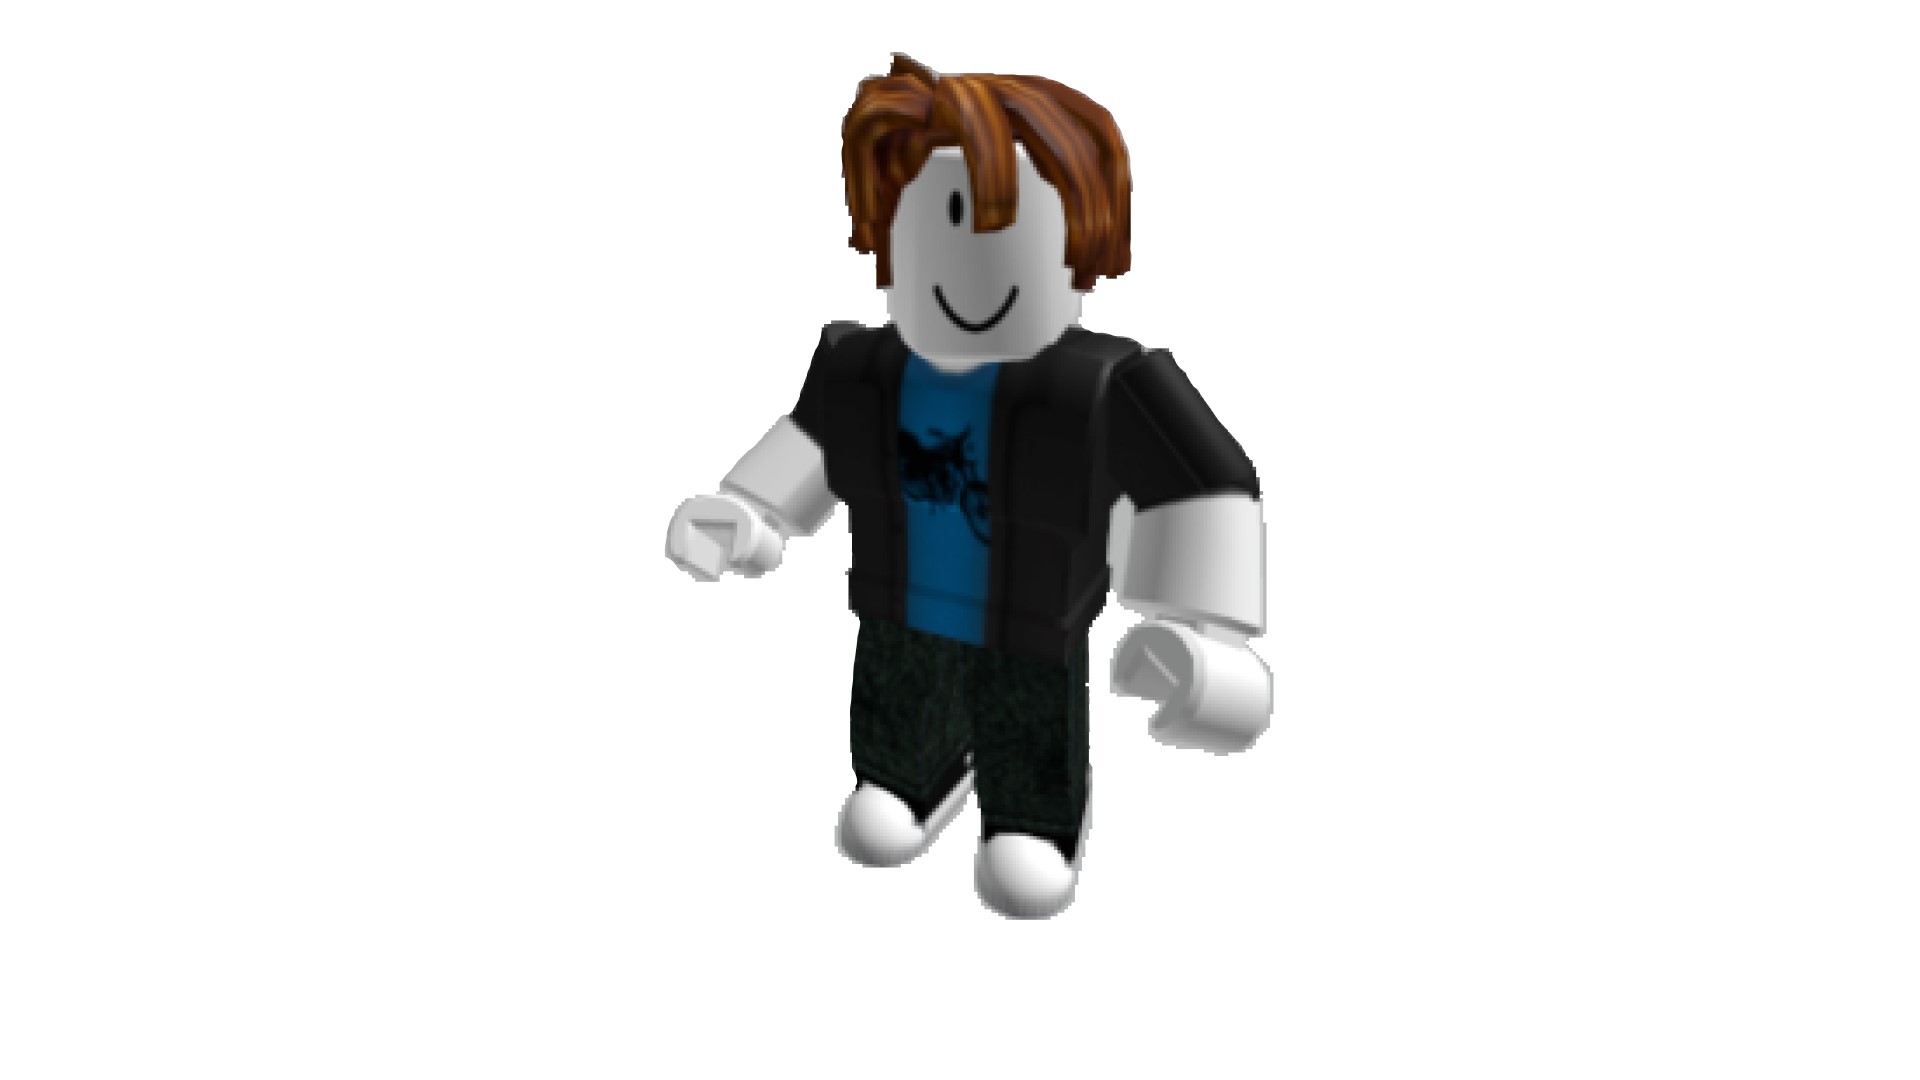 Roblox Noob What Does Noob Mean In Roblox Pocket Tactics - how to make noob avatar in roblox